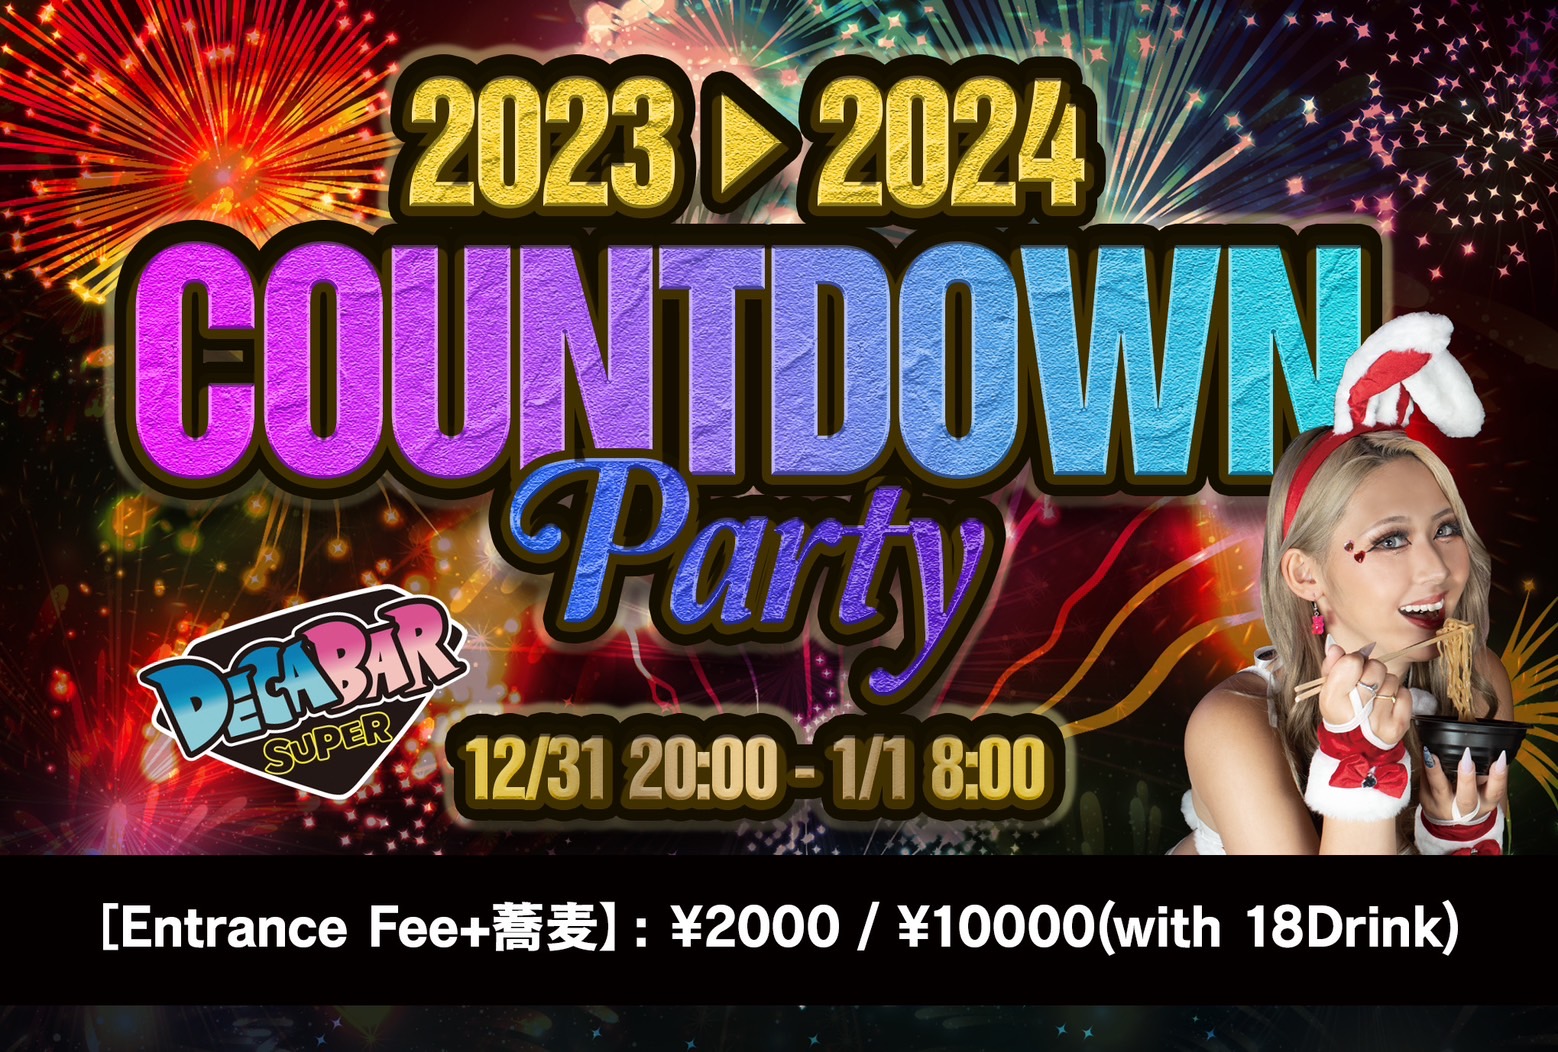 DecaBar COUNTDOWN PARTY 2023→2024